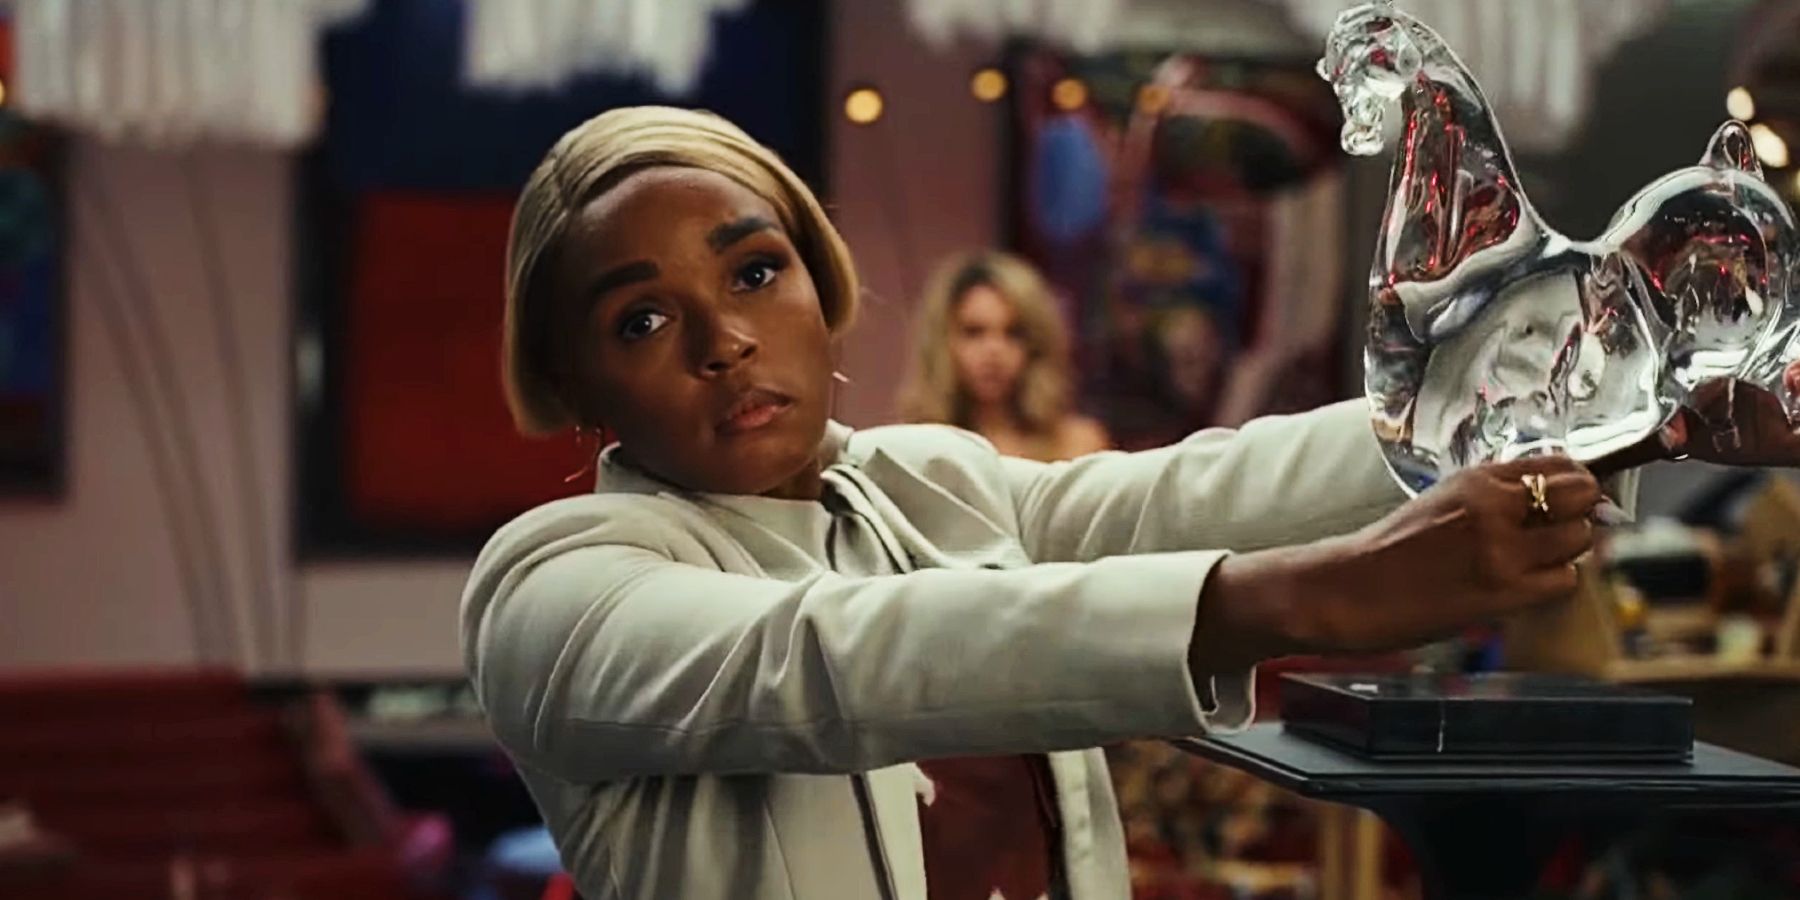 Janelle Monae about to break a glass sculpture in Glass Onion: A Knives Out Mystery.